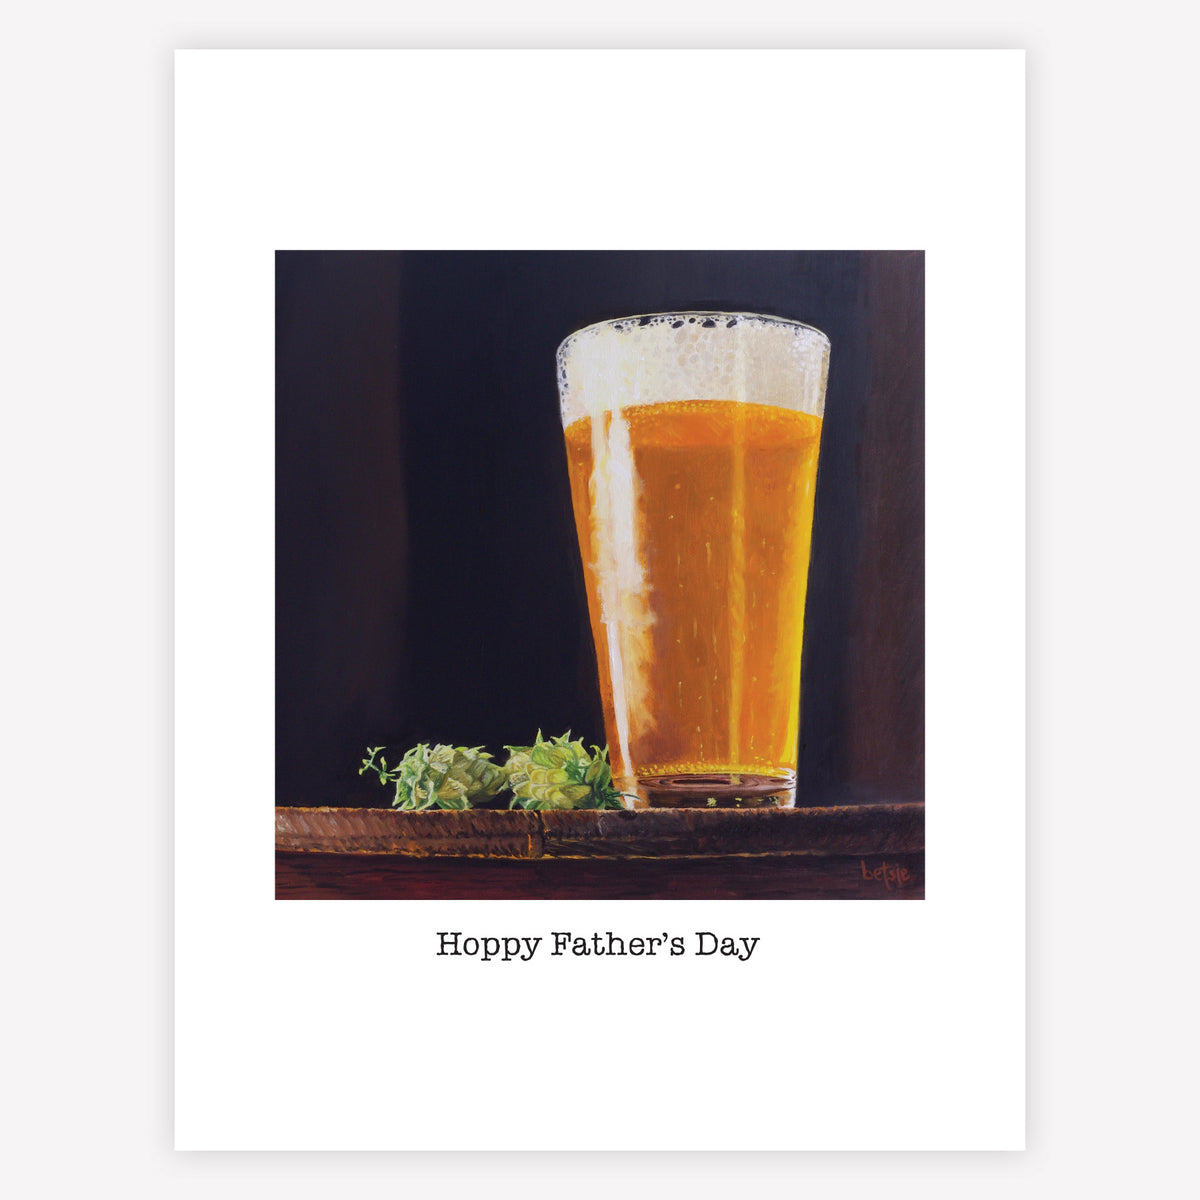 "Hoppy Father's Day" Greeting Card